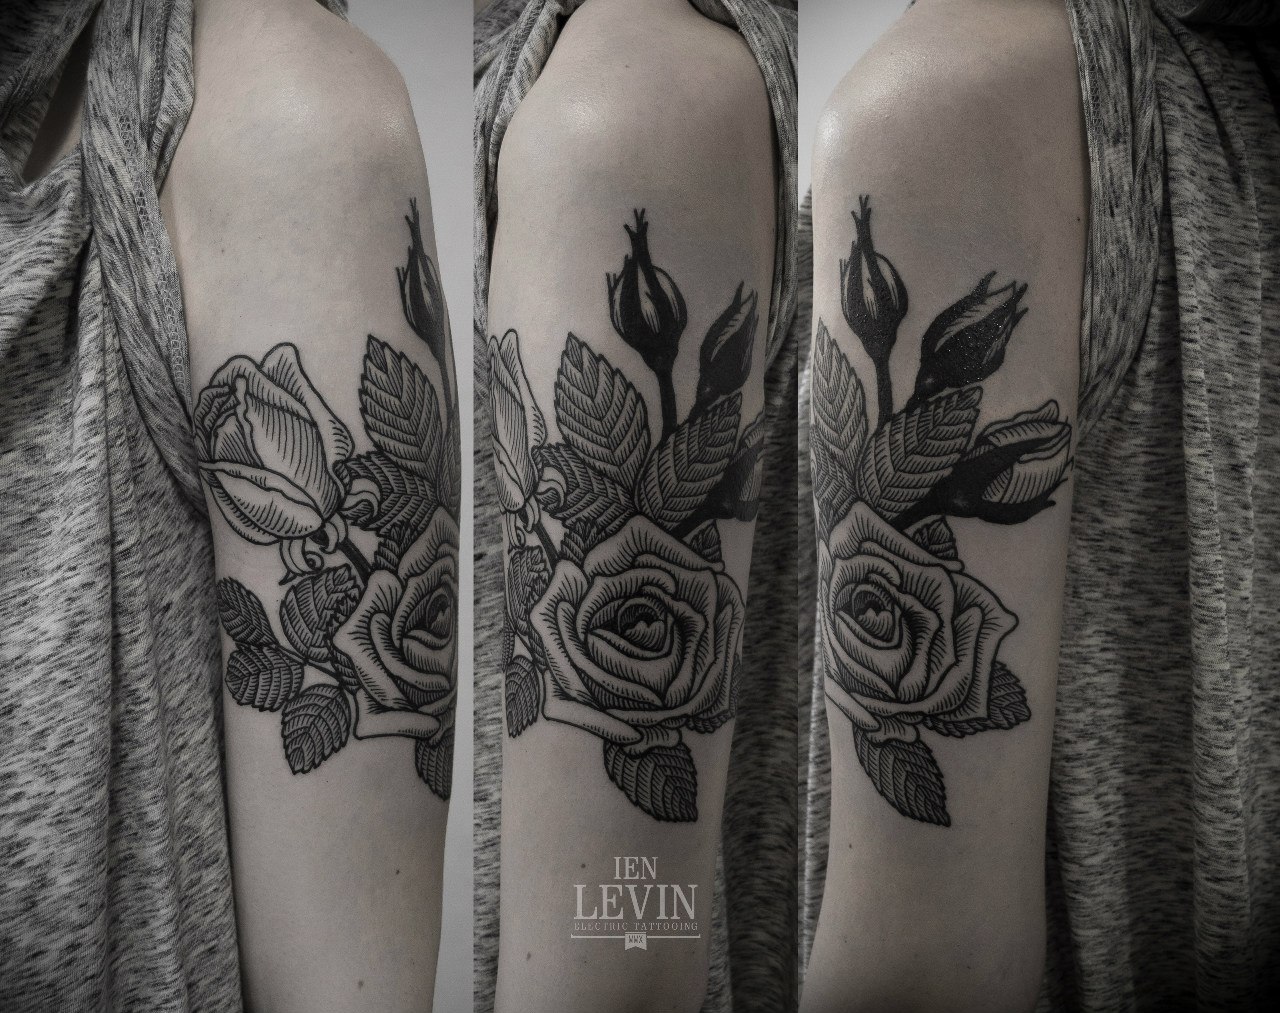 Etching Roses Dotwork tattoo by Ien Levin